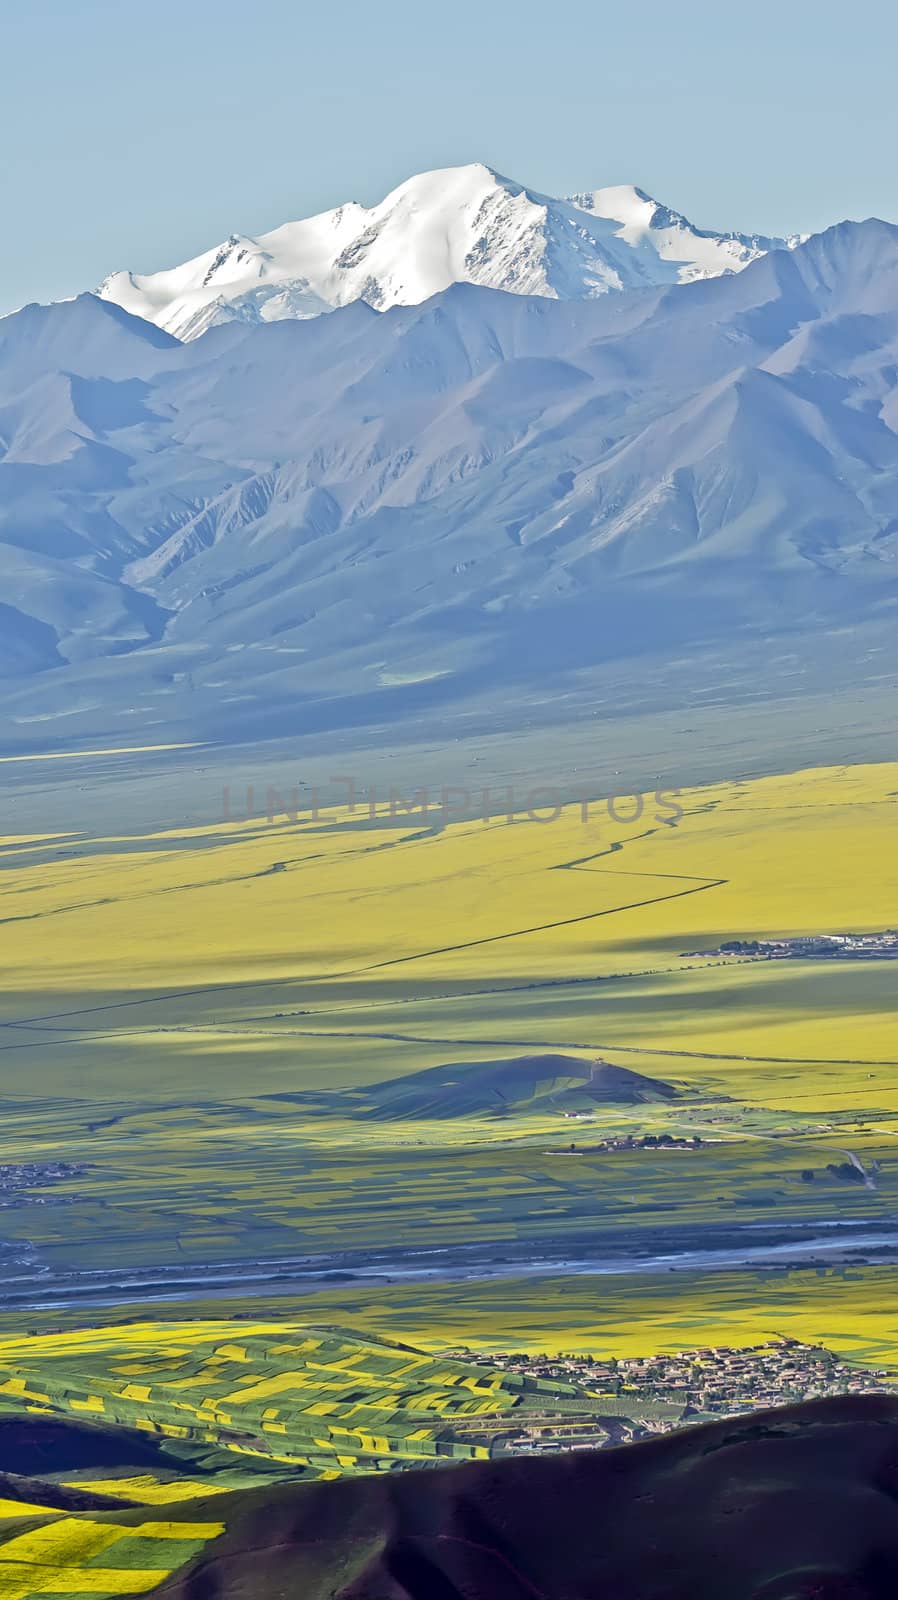 Oil seed rape field in the summer - was taken in Qinghai, China by xfdly5